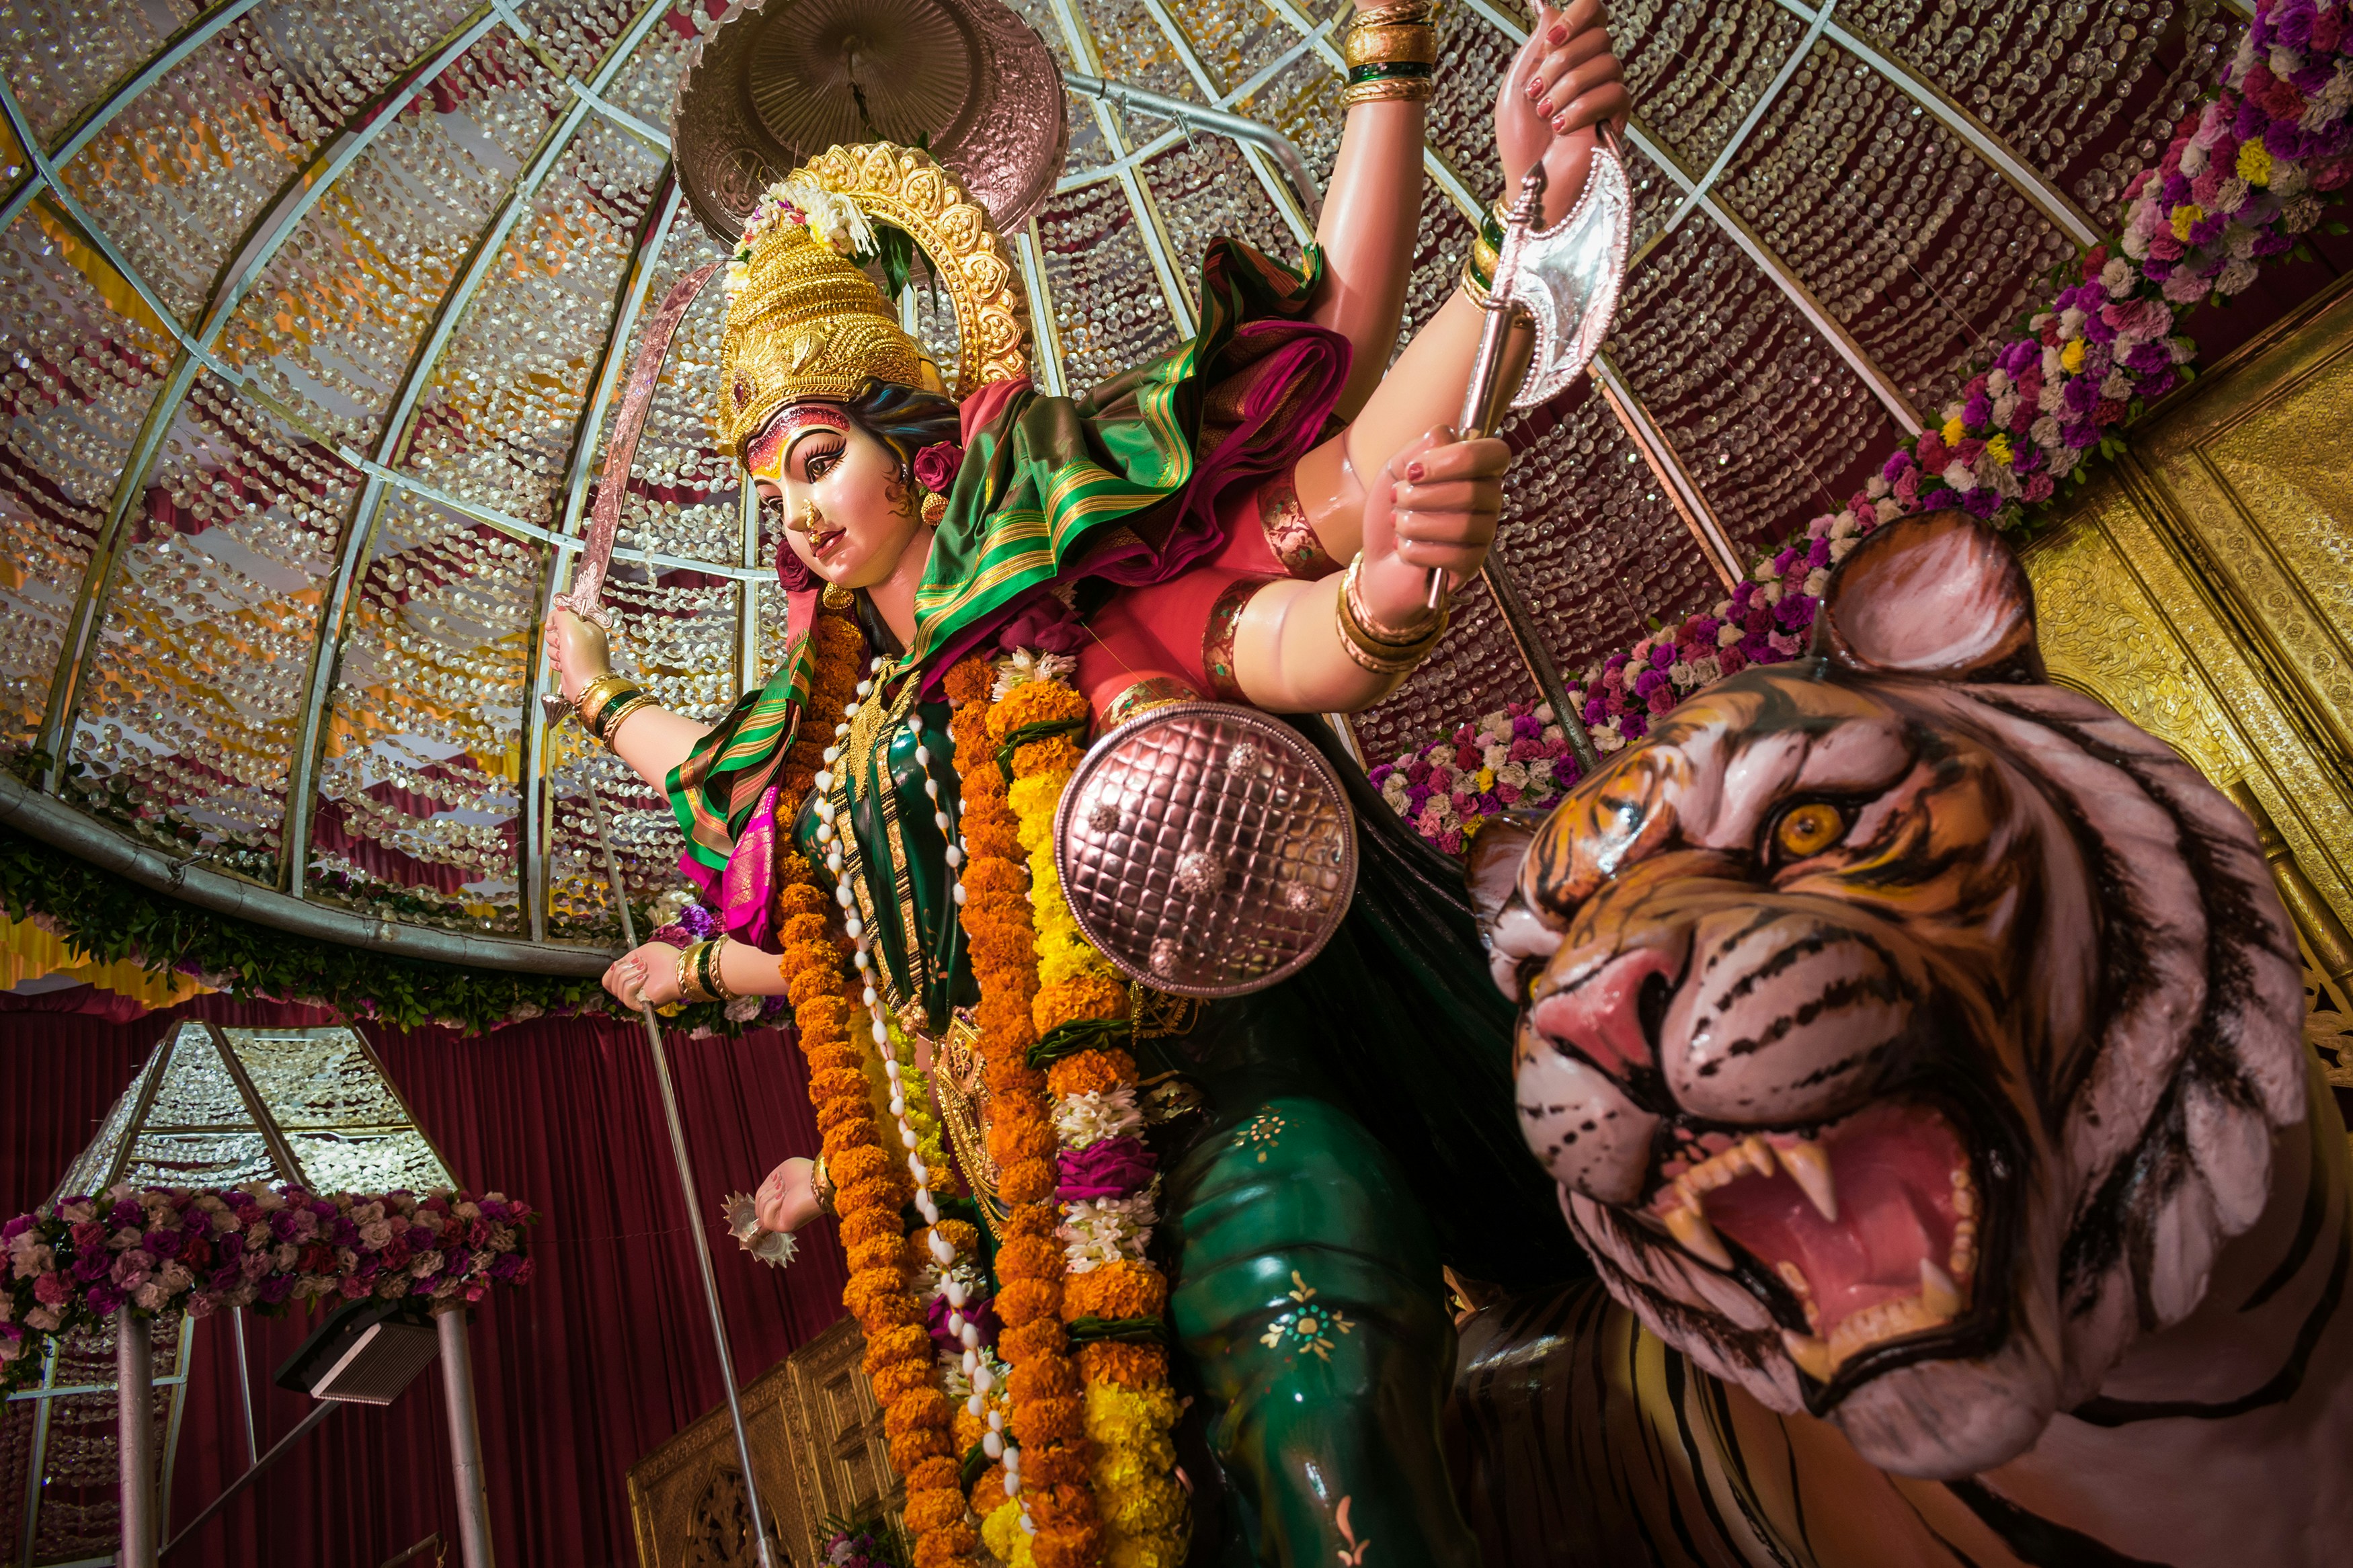 A cultural idol- statue of the mother goddess Maa Durga Devi in Mumbai, made in celebration of Durga Puja. She is depicted with six arms, wielding weapons such as a spear and an axe, and is flanked by a tiger.